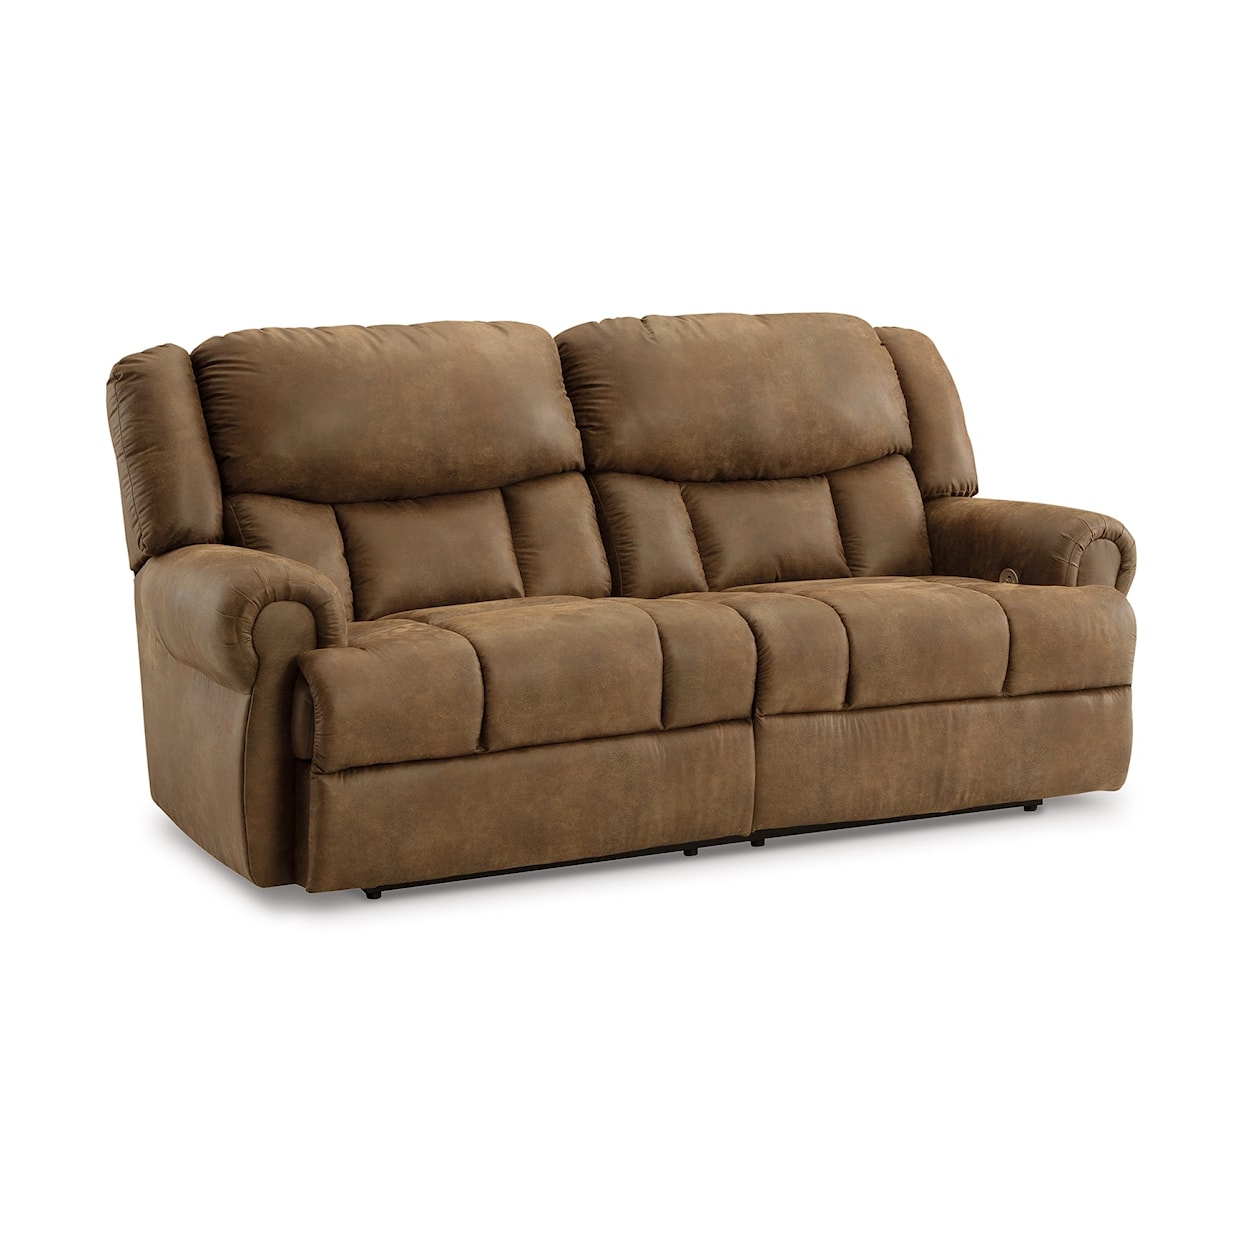 Signature Design by Ashley Boothbay 2 Seat Reclining Power Sofa